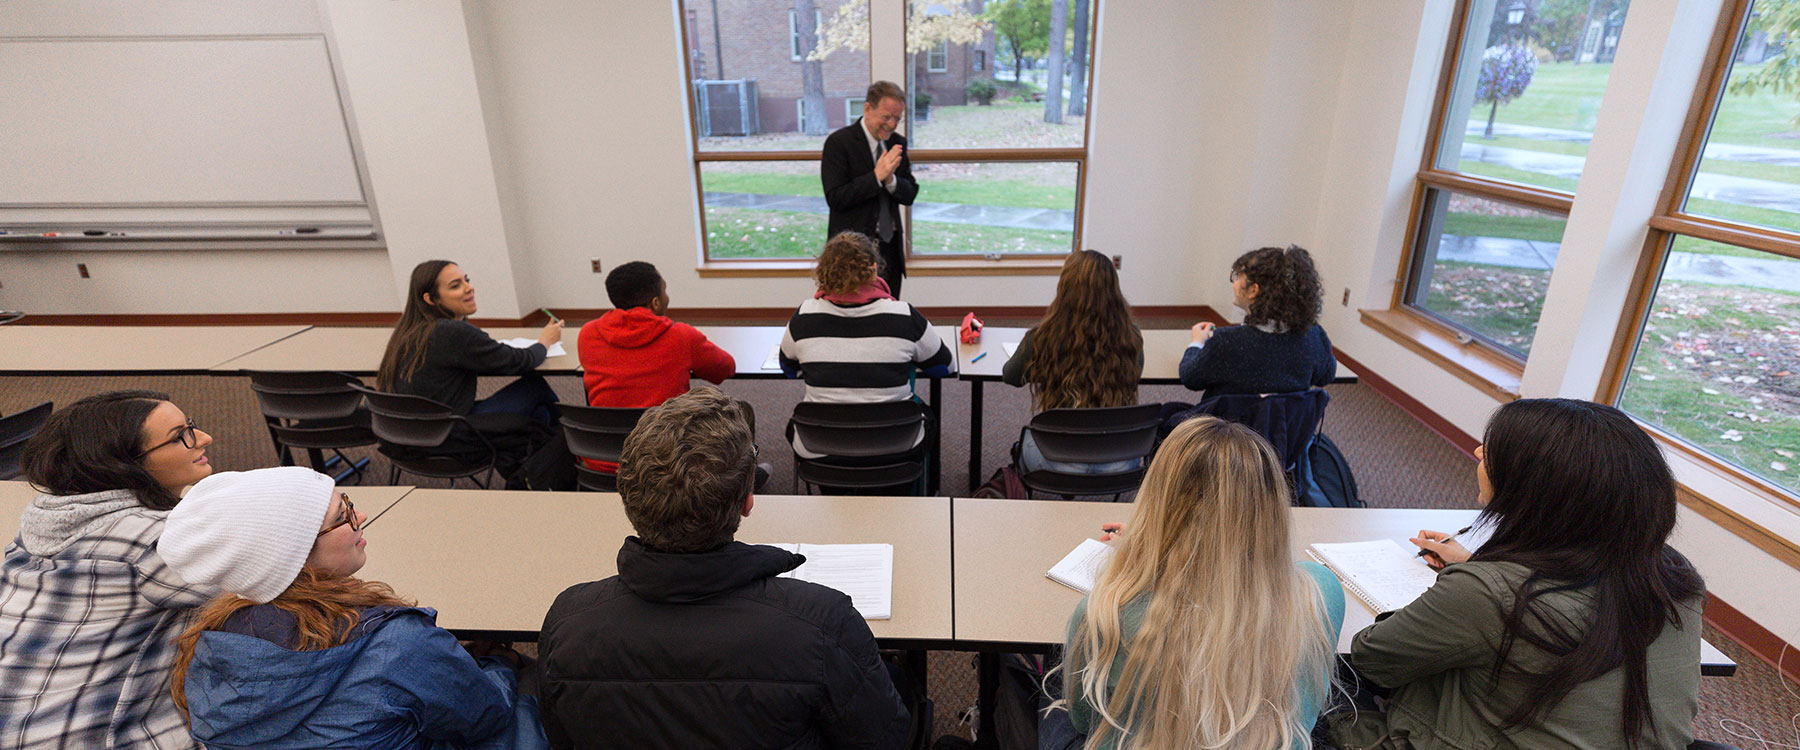 Philosophy professor Forrest Baird talks to a class of students